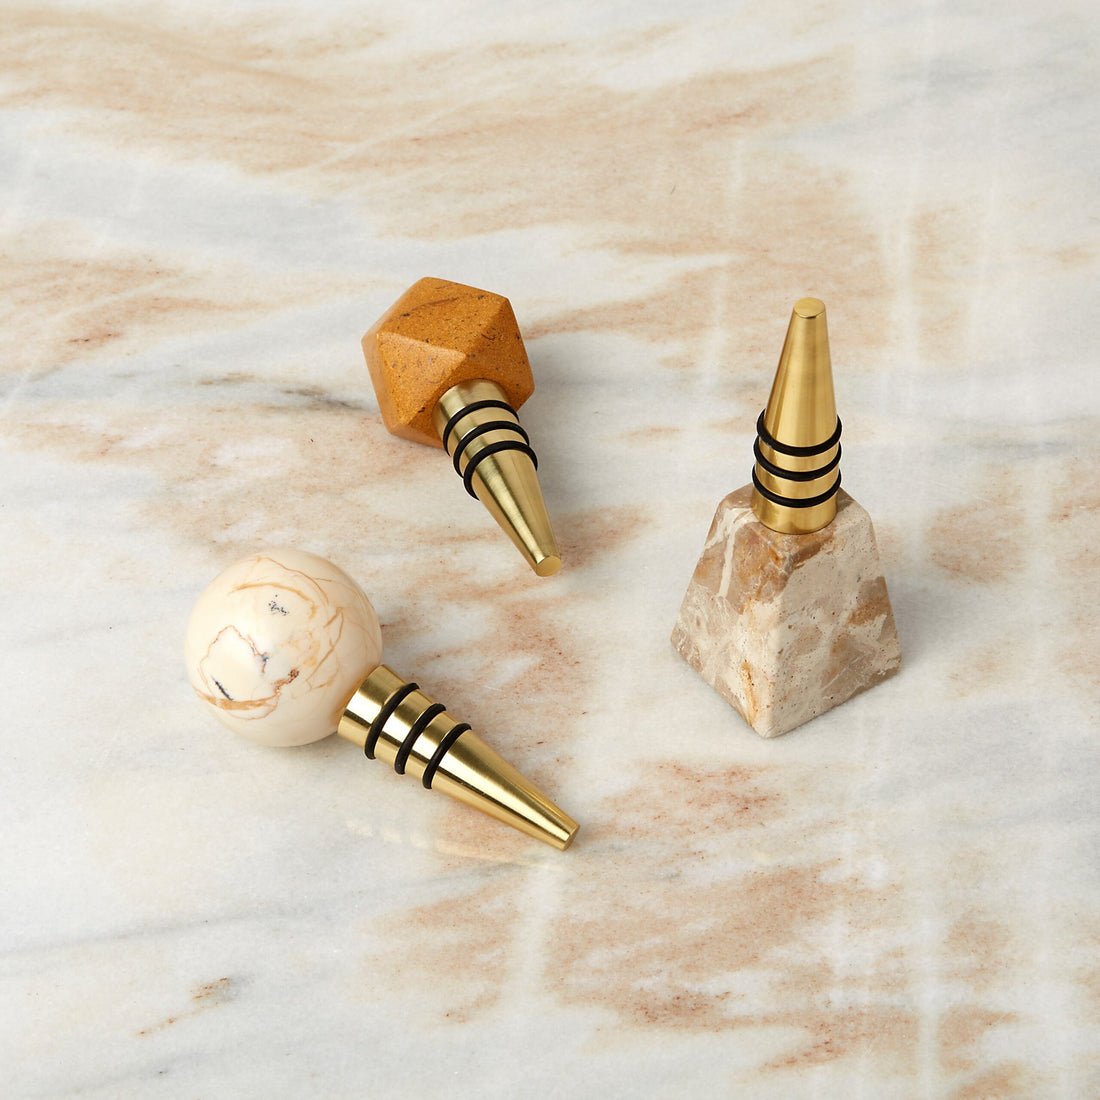 Assorted Marble Bottle Stoppers, Set of 3 In Gift Box